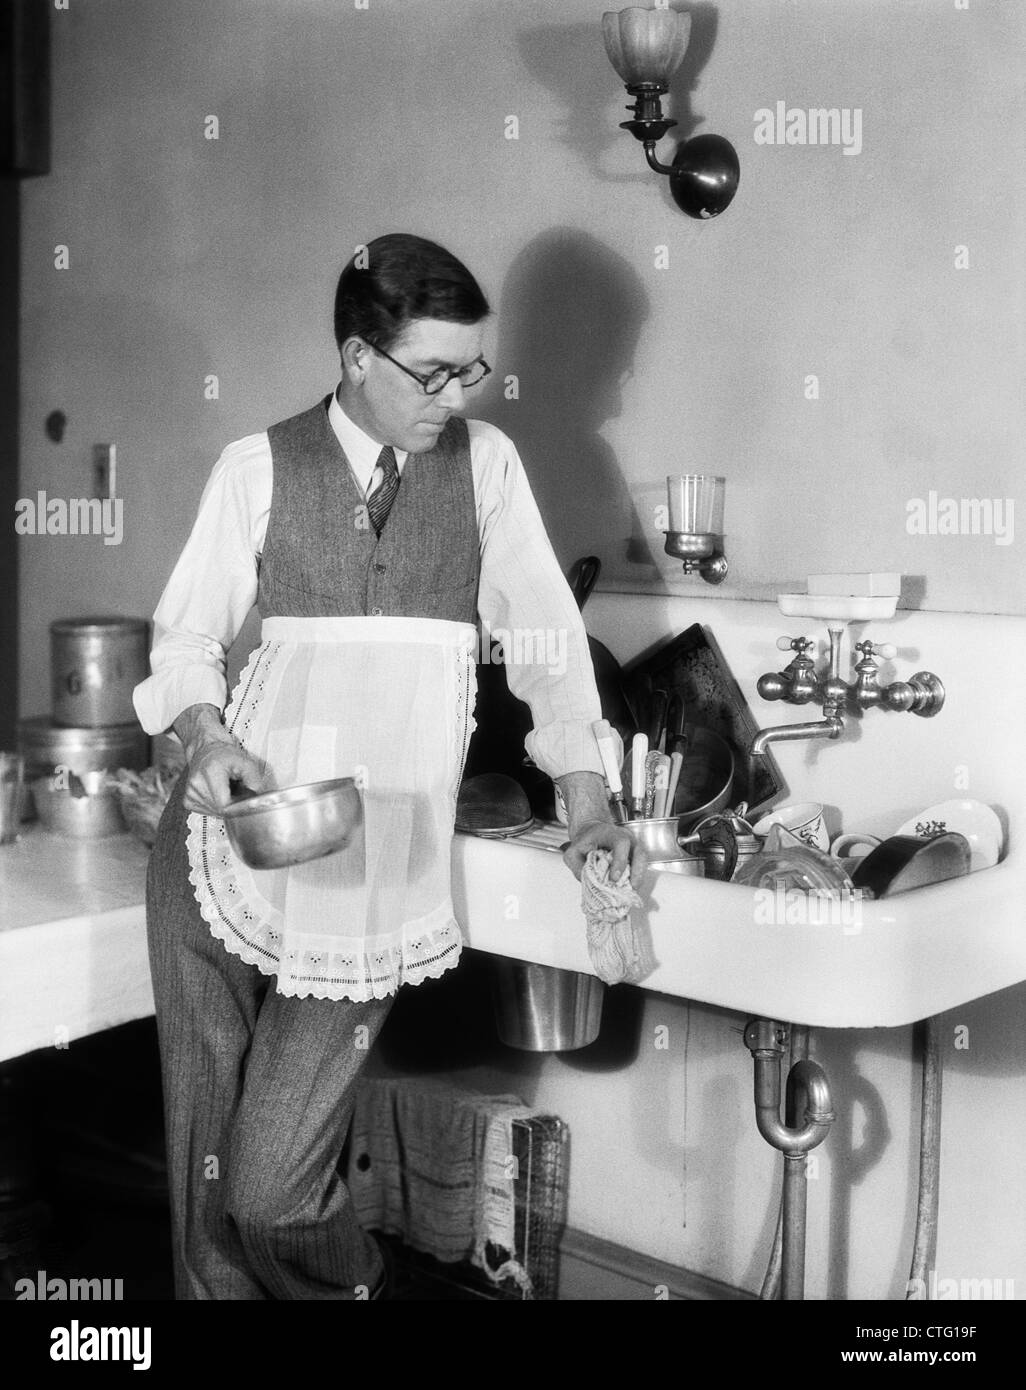 1920s MAN IN APRON LEANING ON SINK FULL OF DIRTY DISHES RAG IN ONE HAND POT IN OTHER Stock Photo